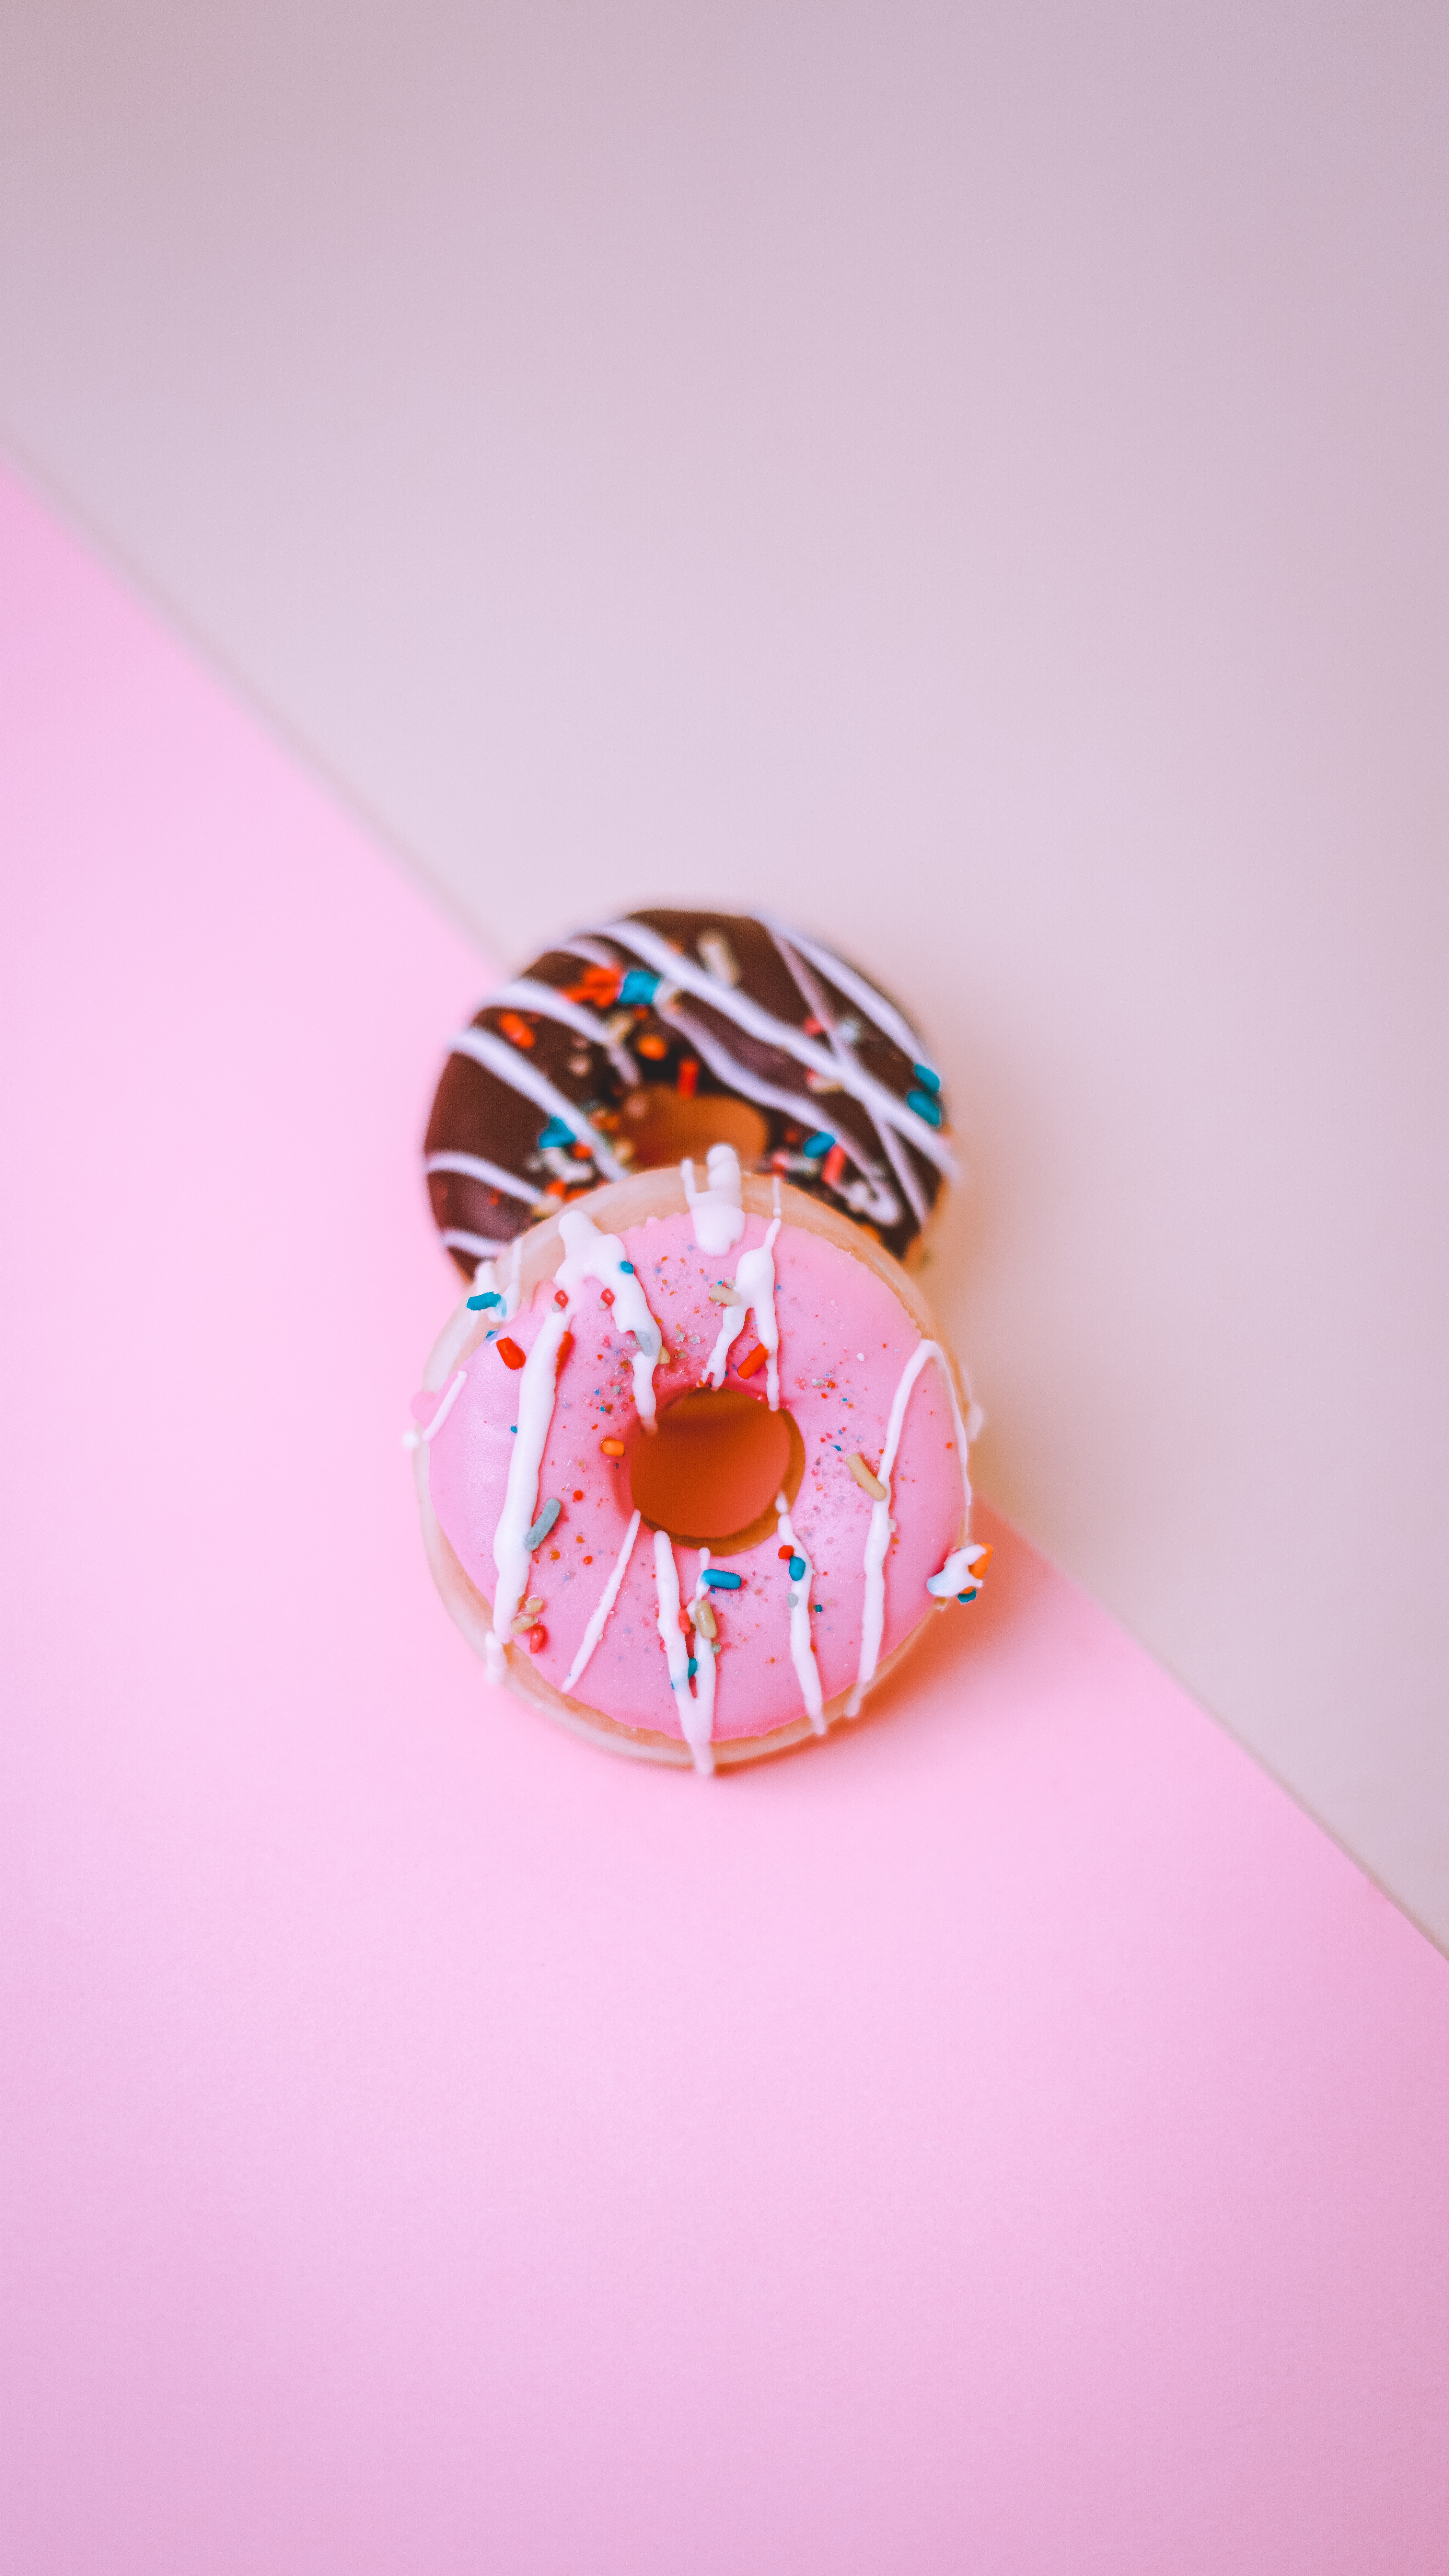 Sweets food, donuts, bakery products, baking Free Stock Photos